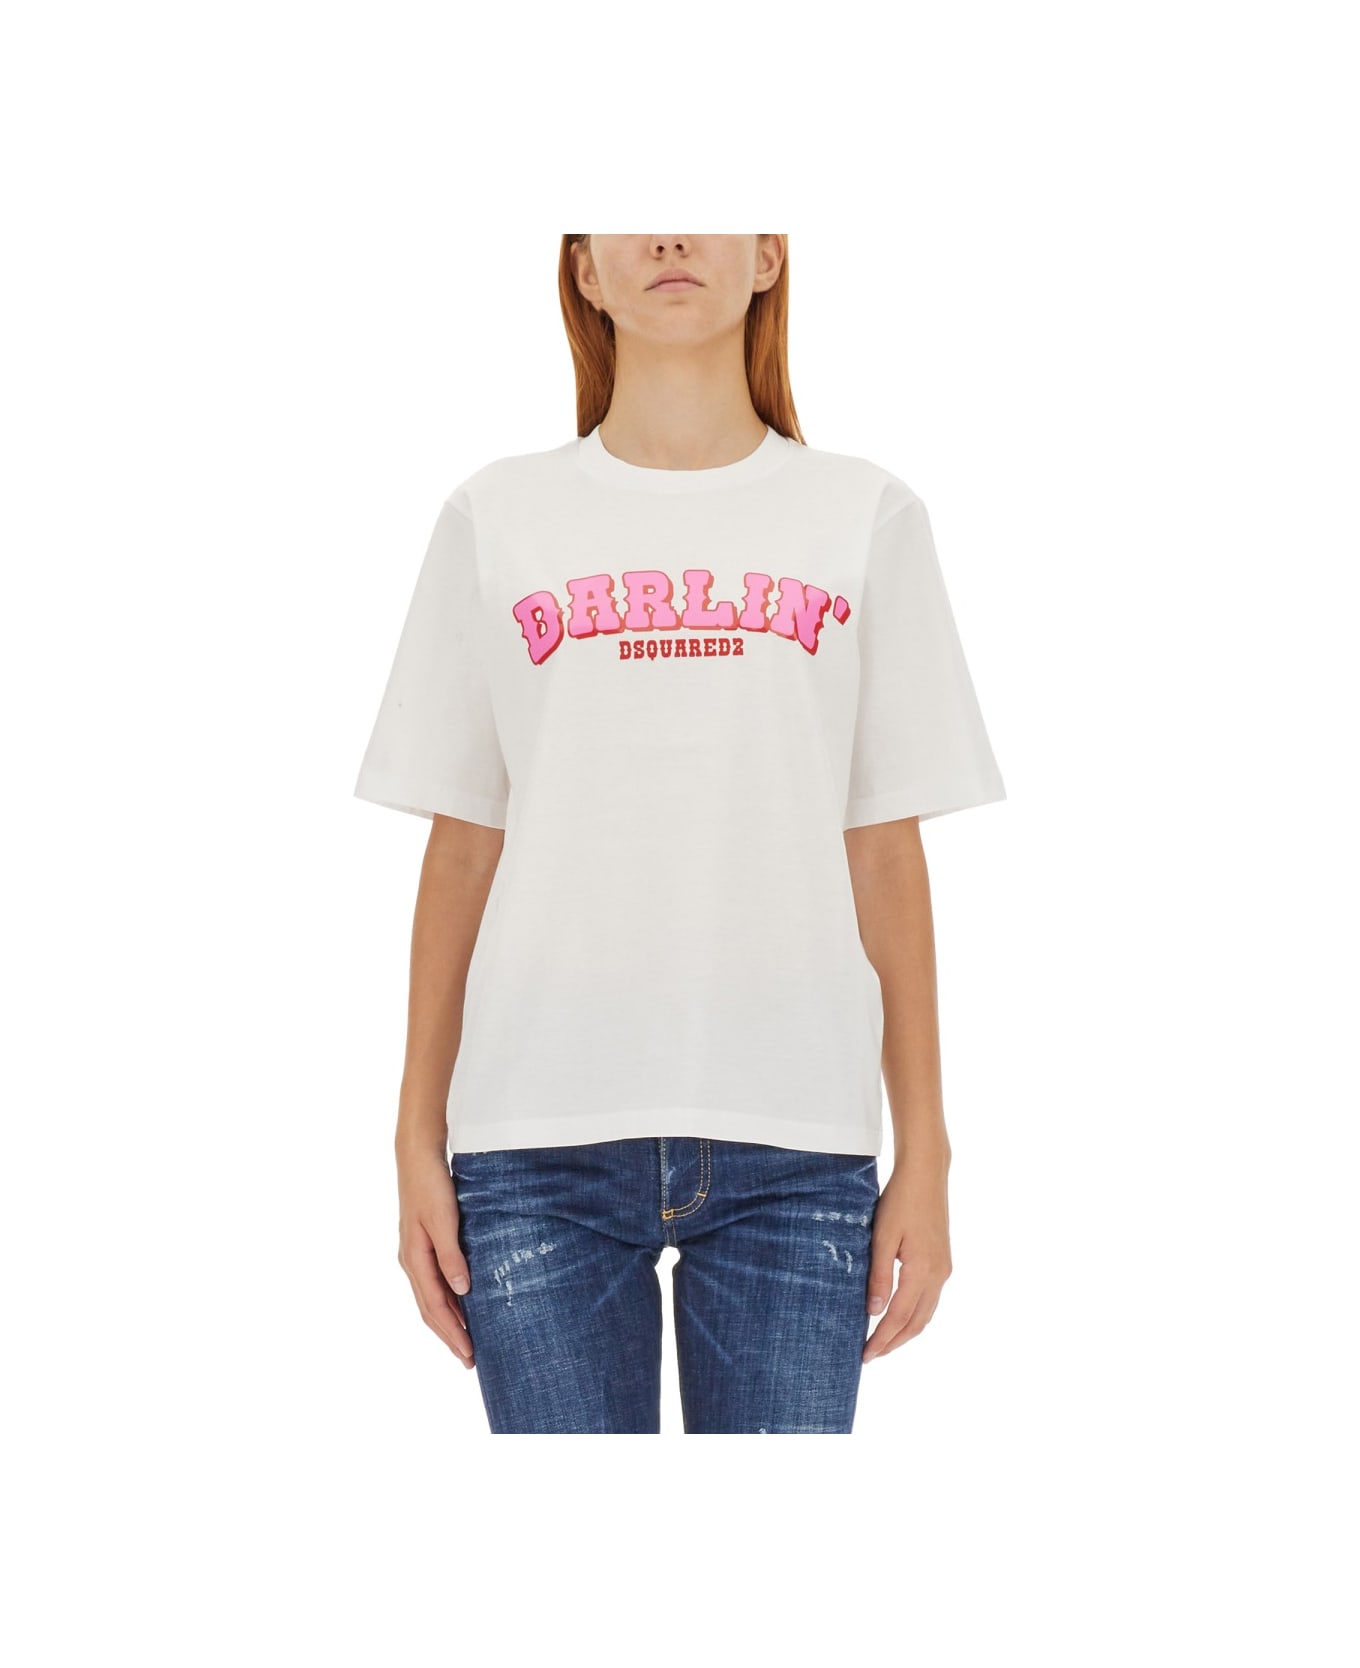 Dsquared2 Easy Fit T-shirt - WHITE Tシャツ